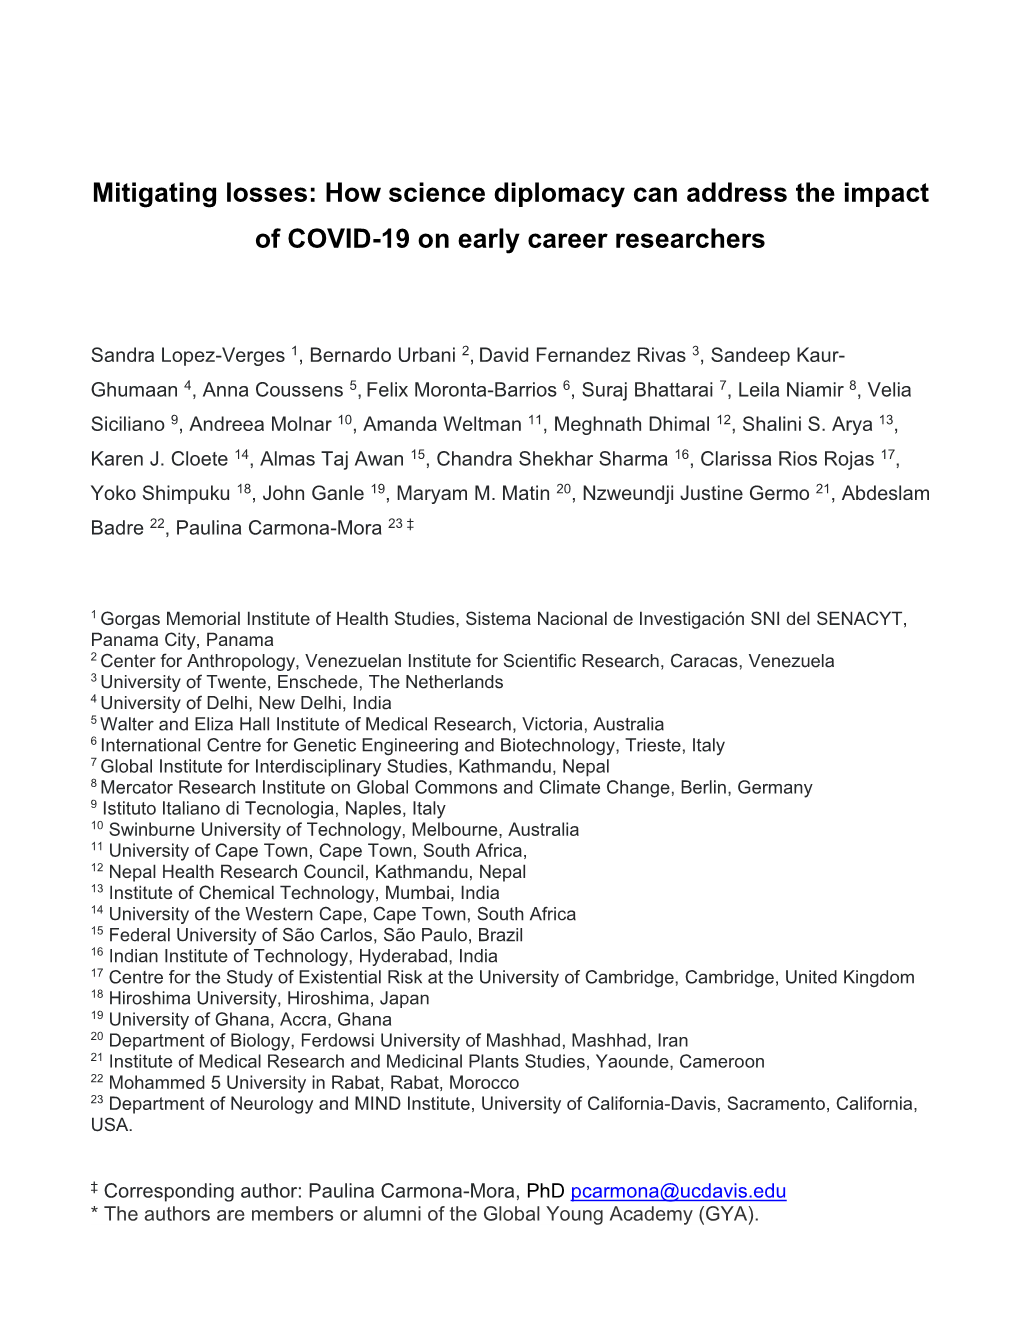 How Science Diplomacy Can Address the Impact of COVID-19 on Early Career Researchers